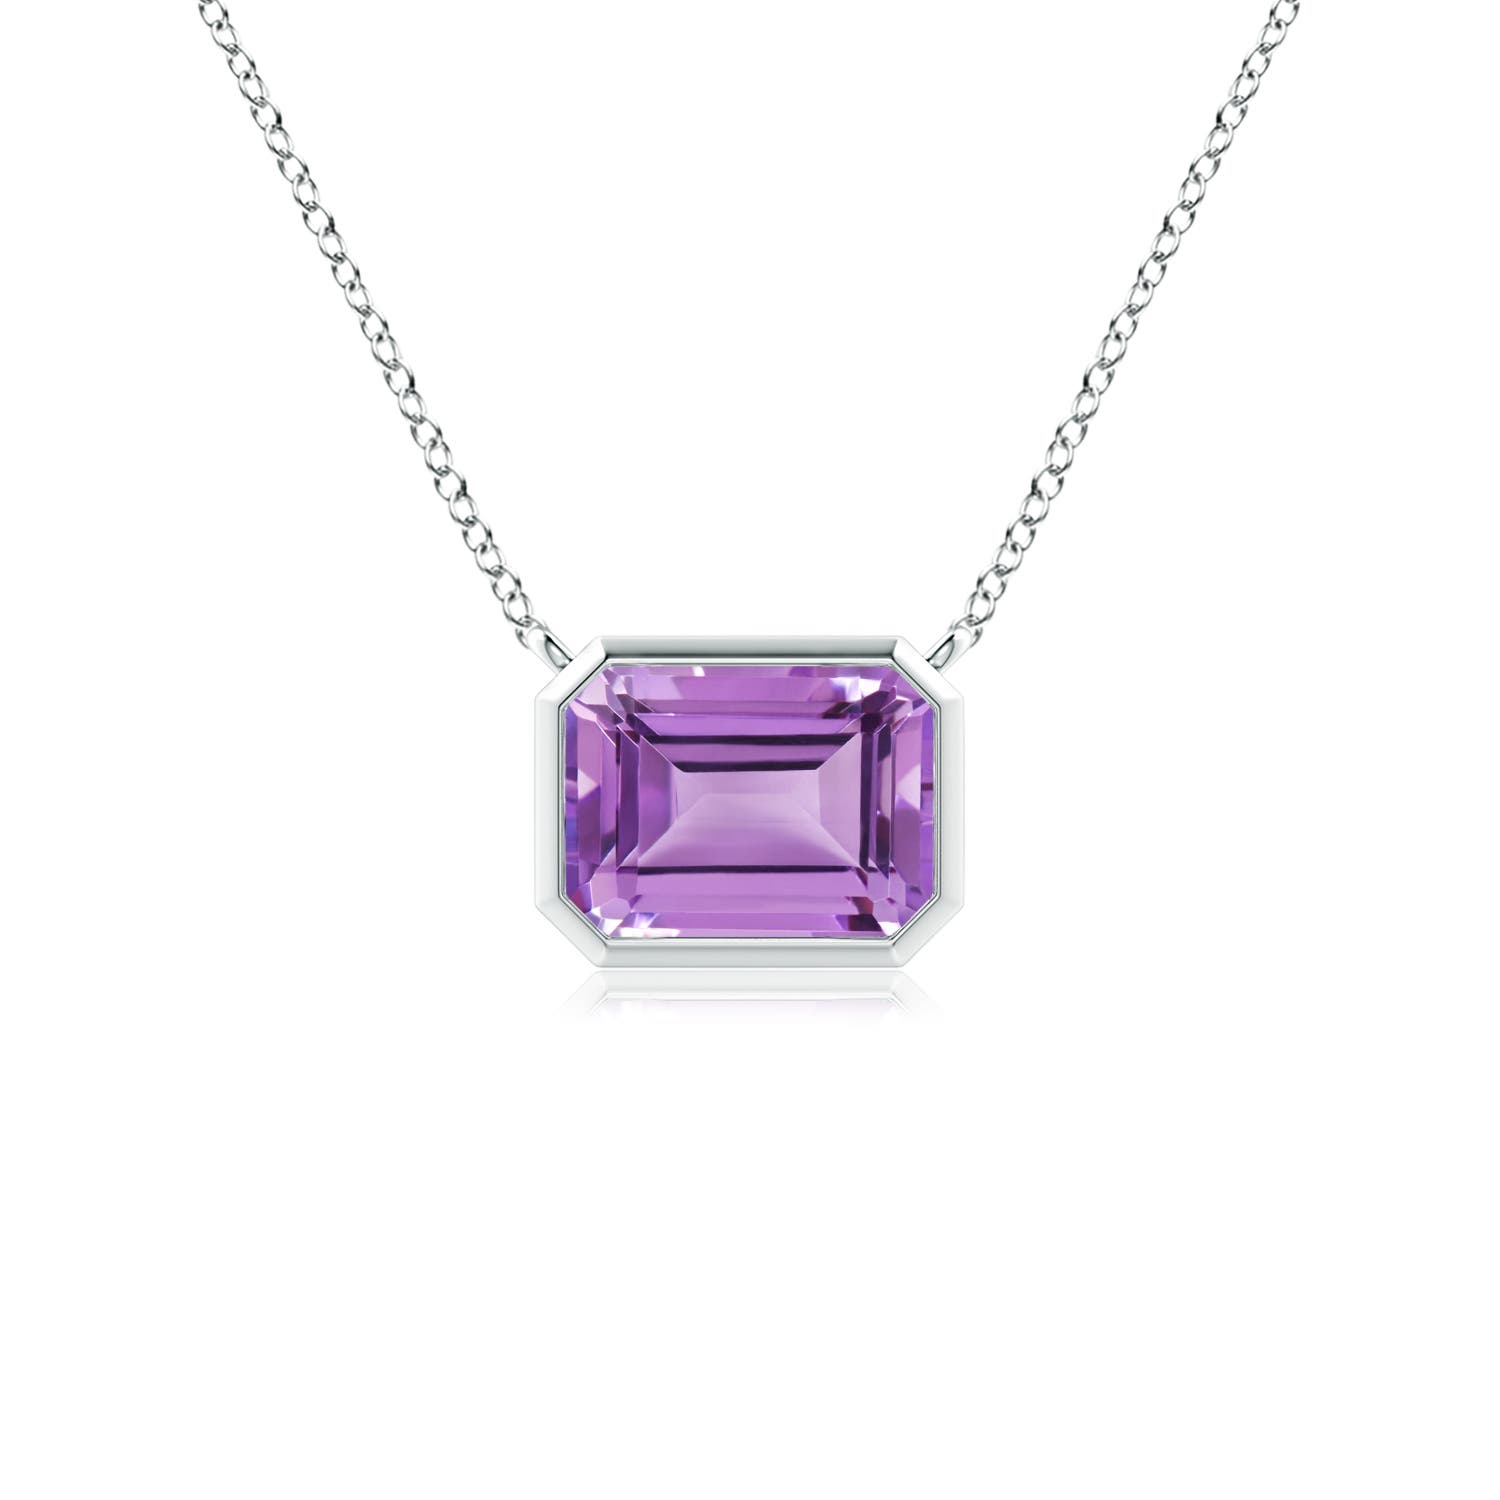 A - Amethyst / 0.9 CT / 14 KT White Gold